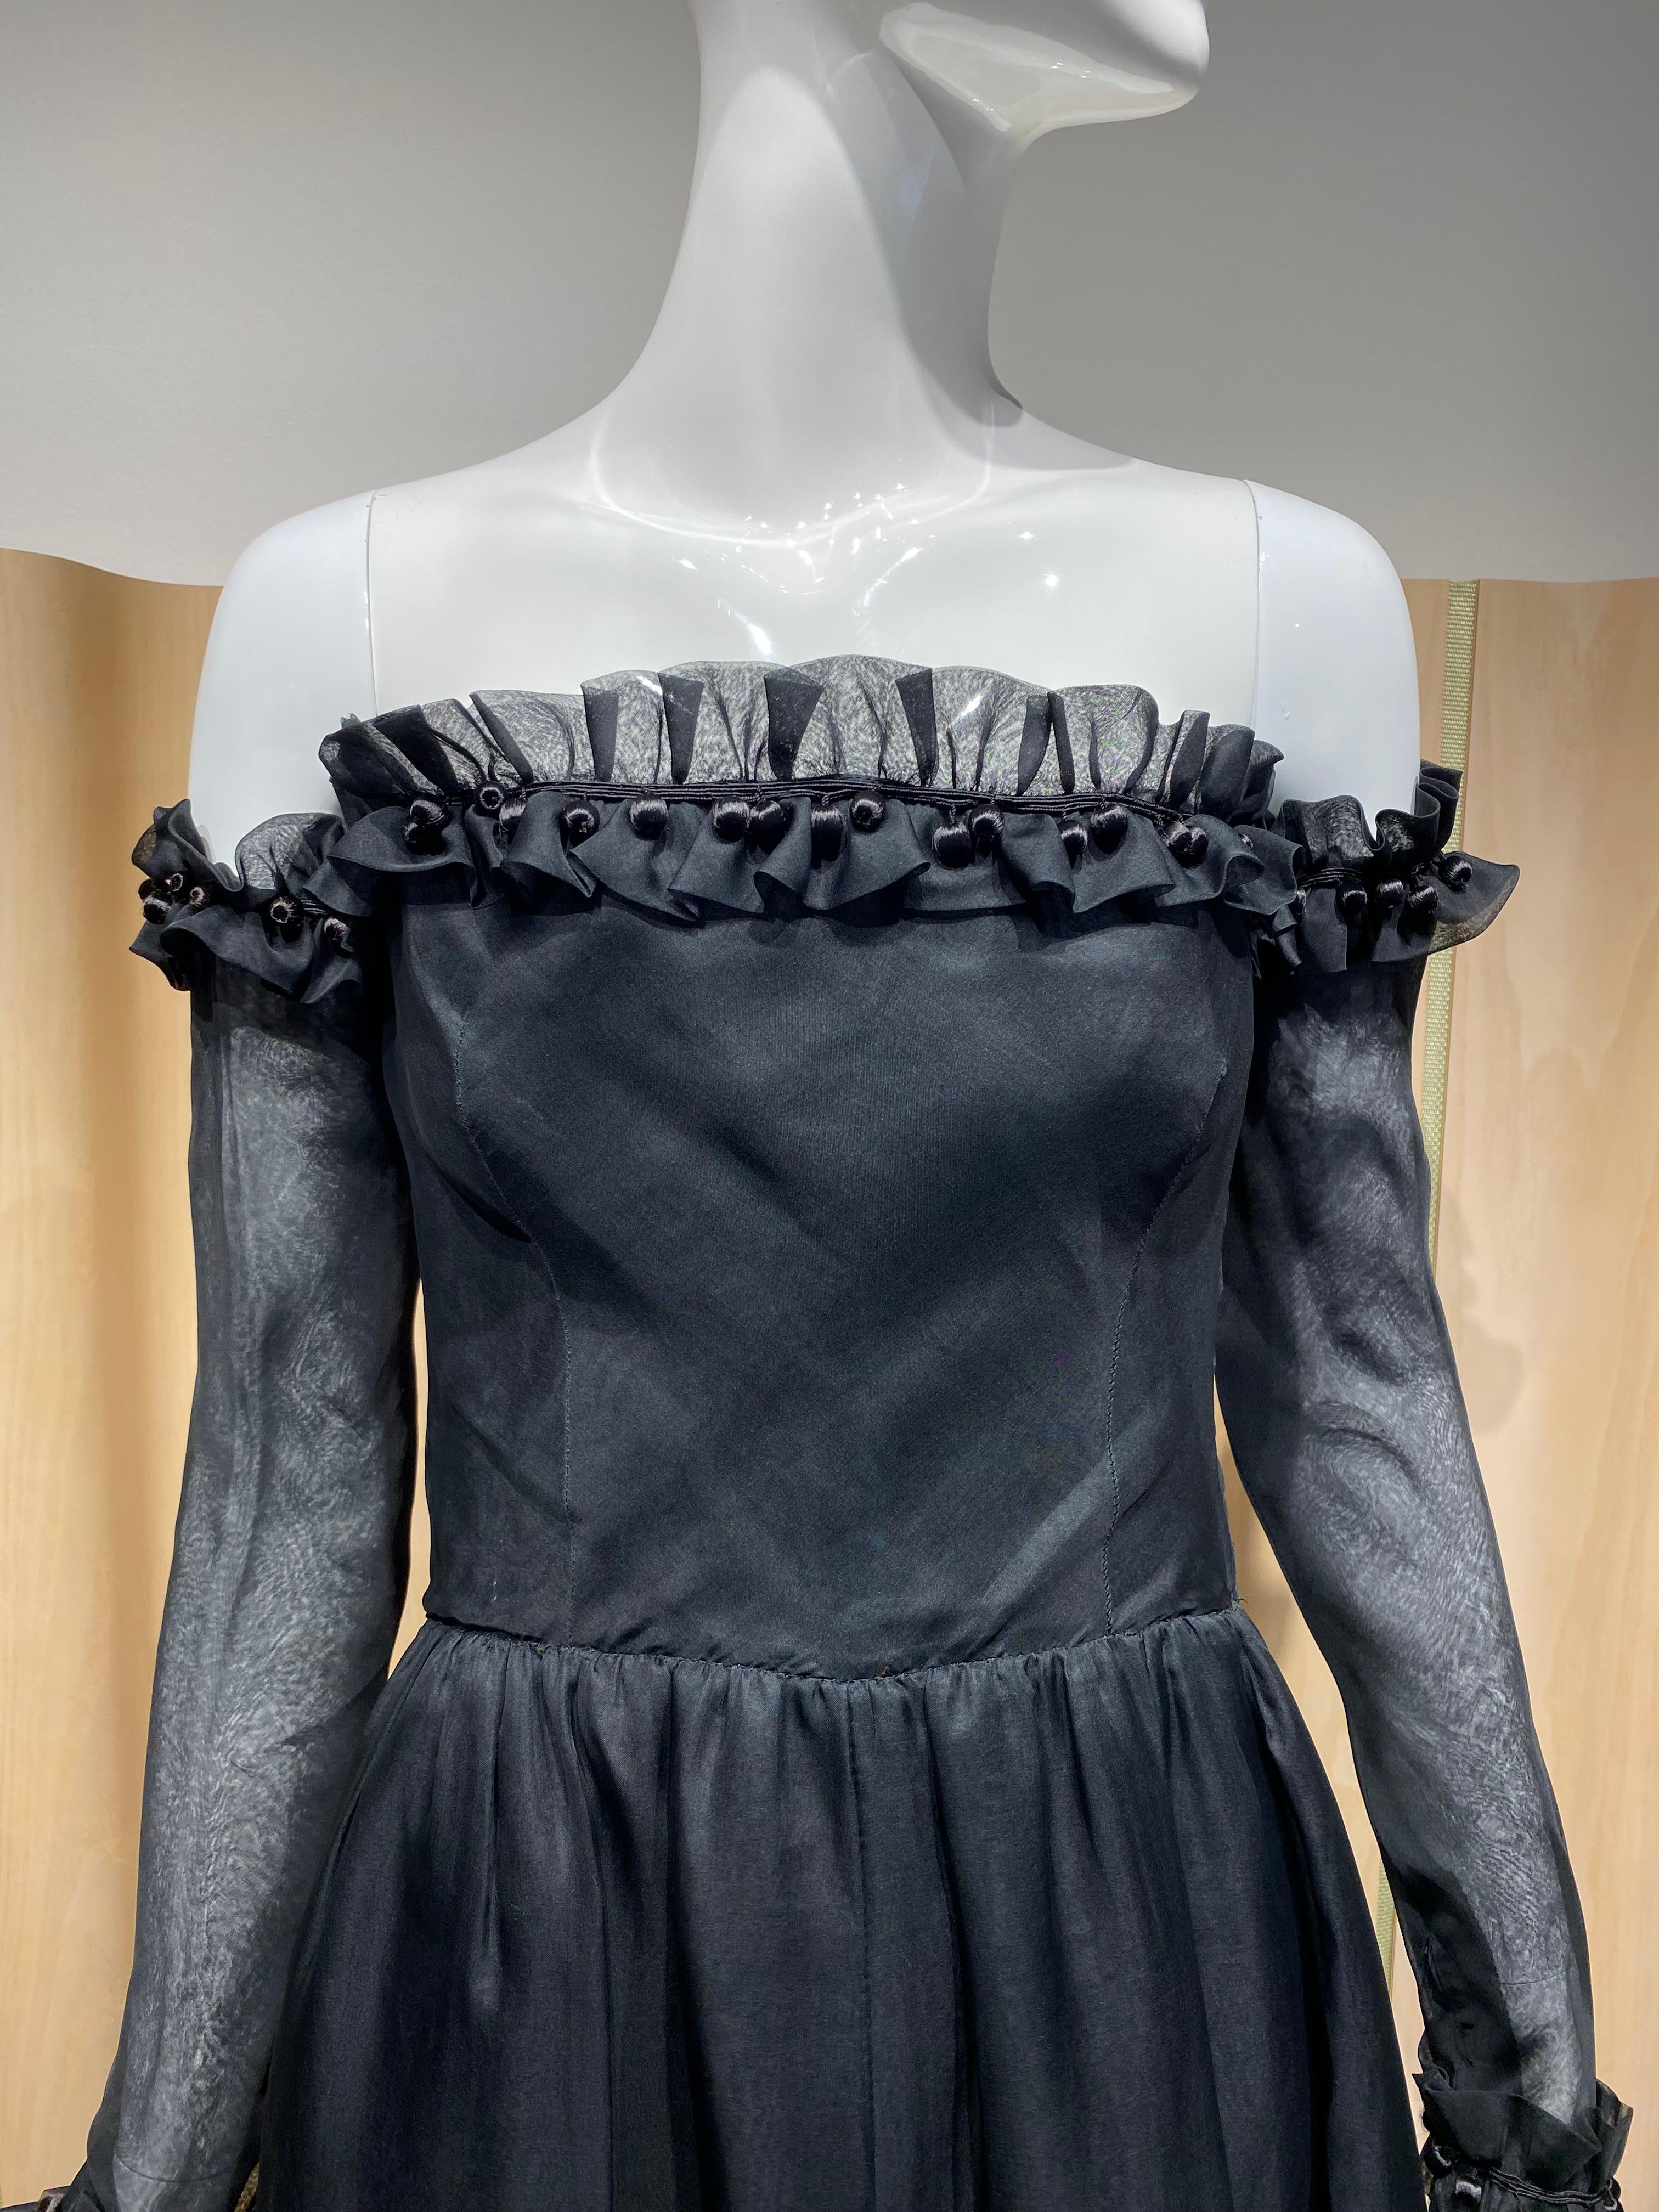 1970s Givenchy by Hubert de givenchy strapless black silk organza dress with ruffle and detachable sleeves. ( see (1970s advertising )
Fit size 0/2 
measurement:
Bust 32” / Waist 24” / Dress length 55”
sleeve length: 23” / sleeve top diameter 8